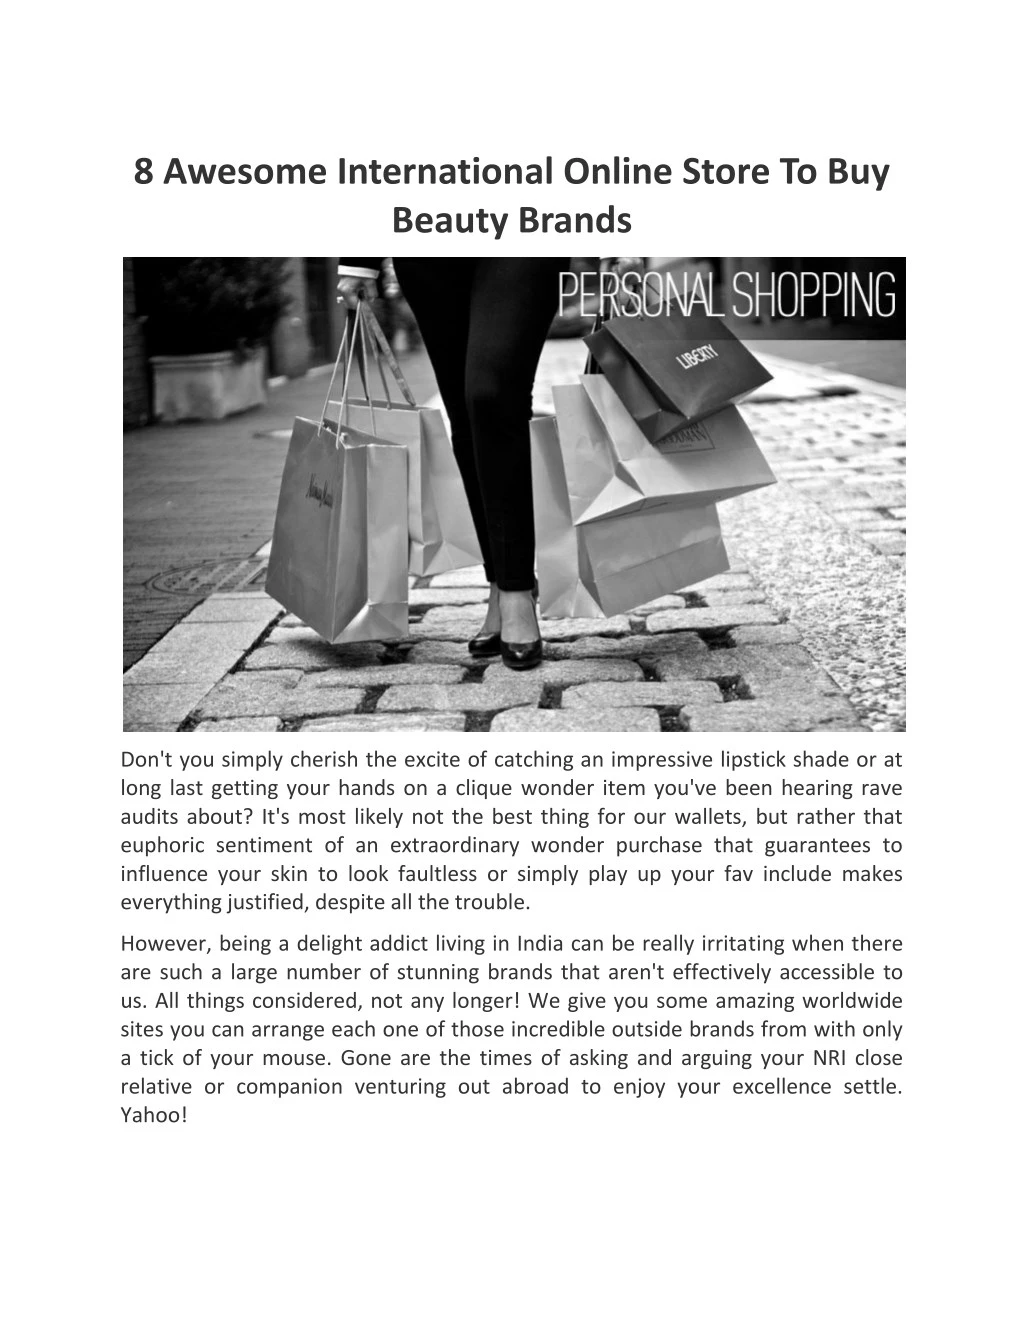 8 awesome international online store